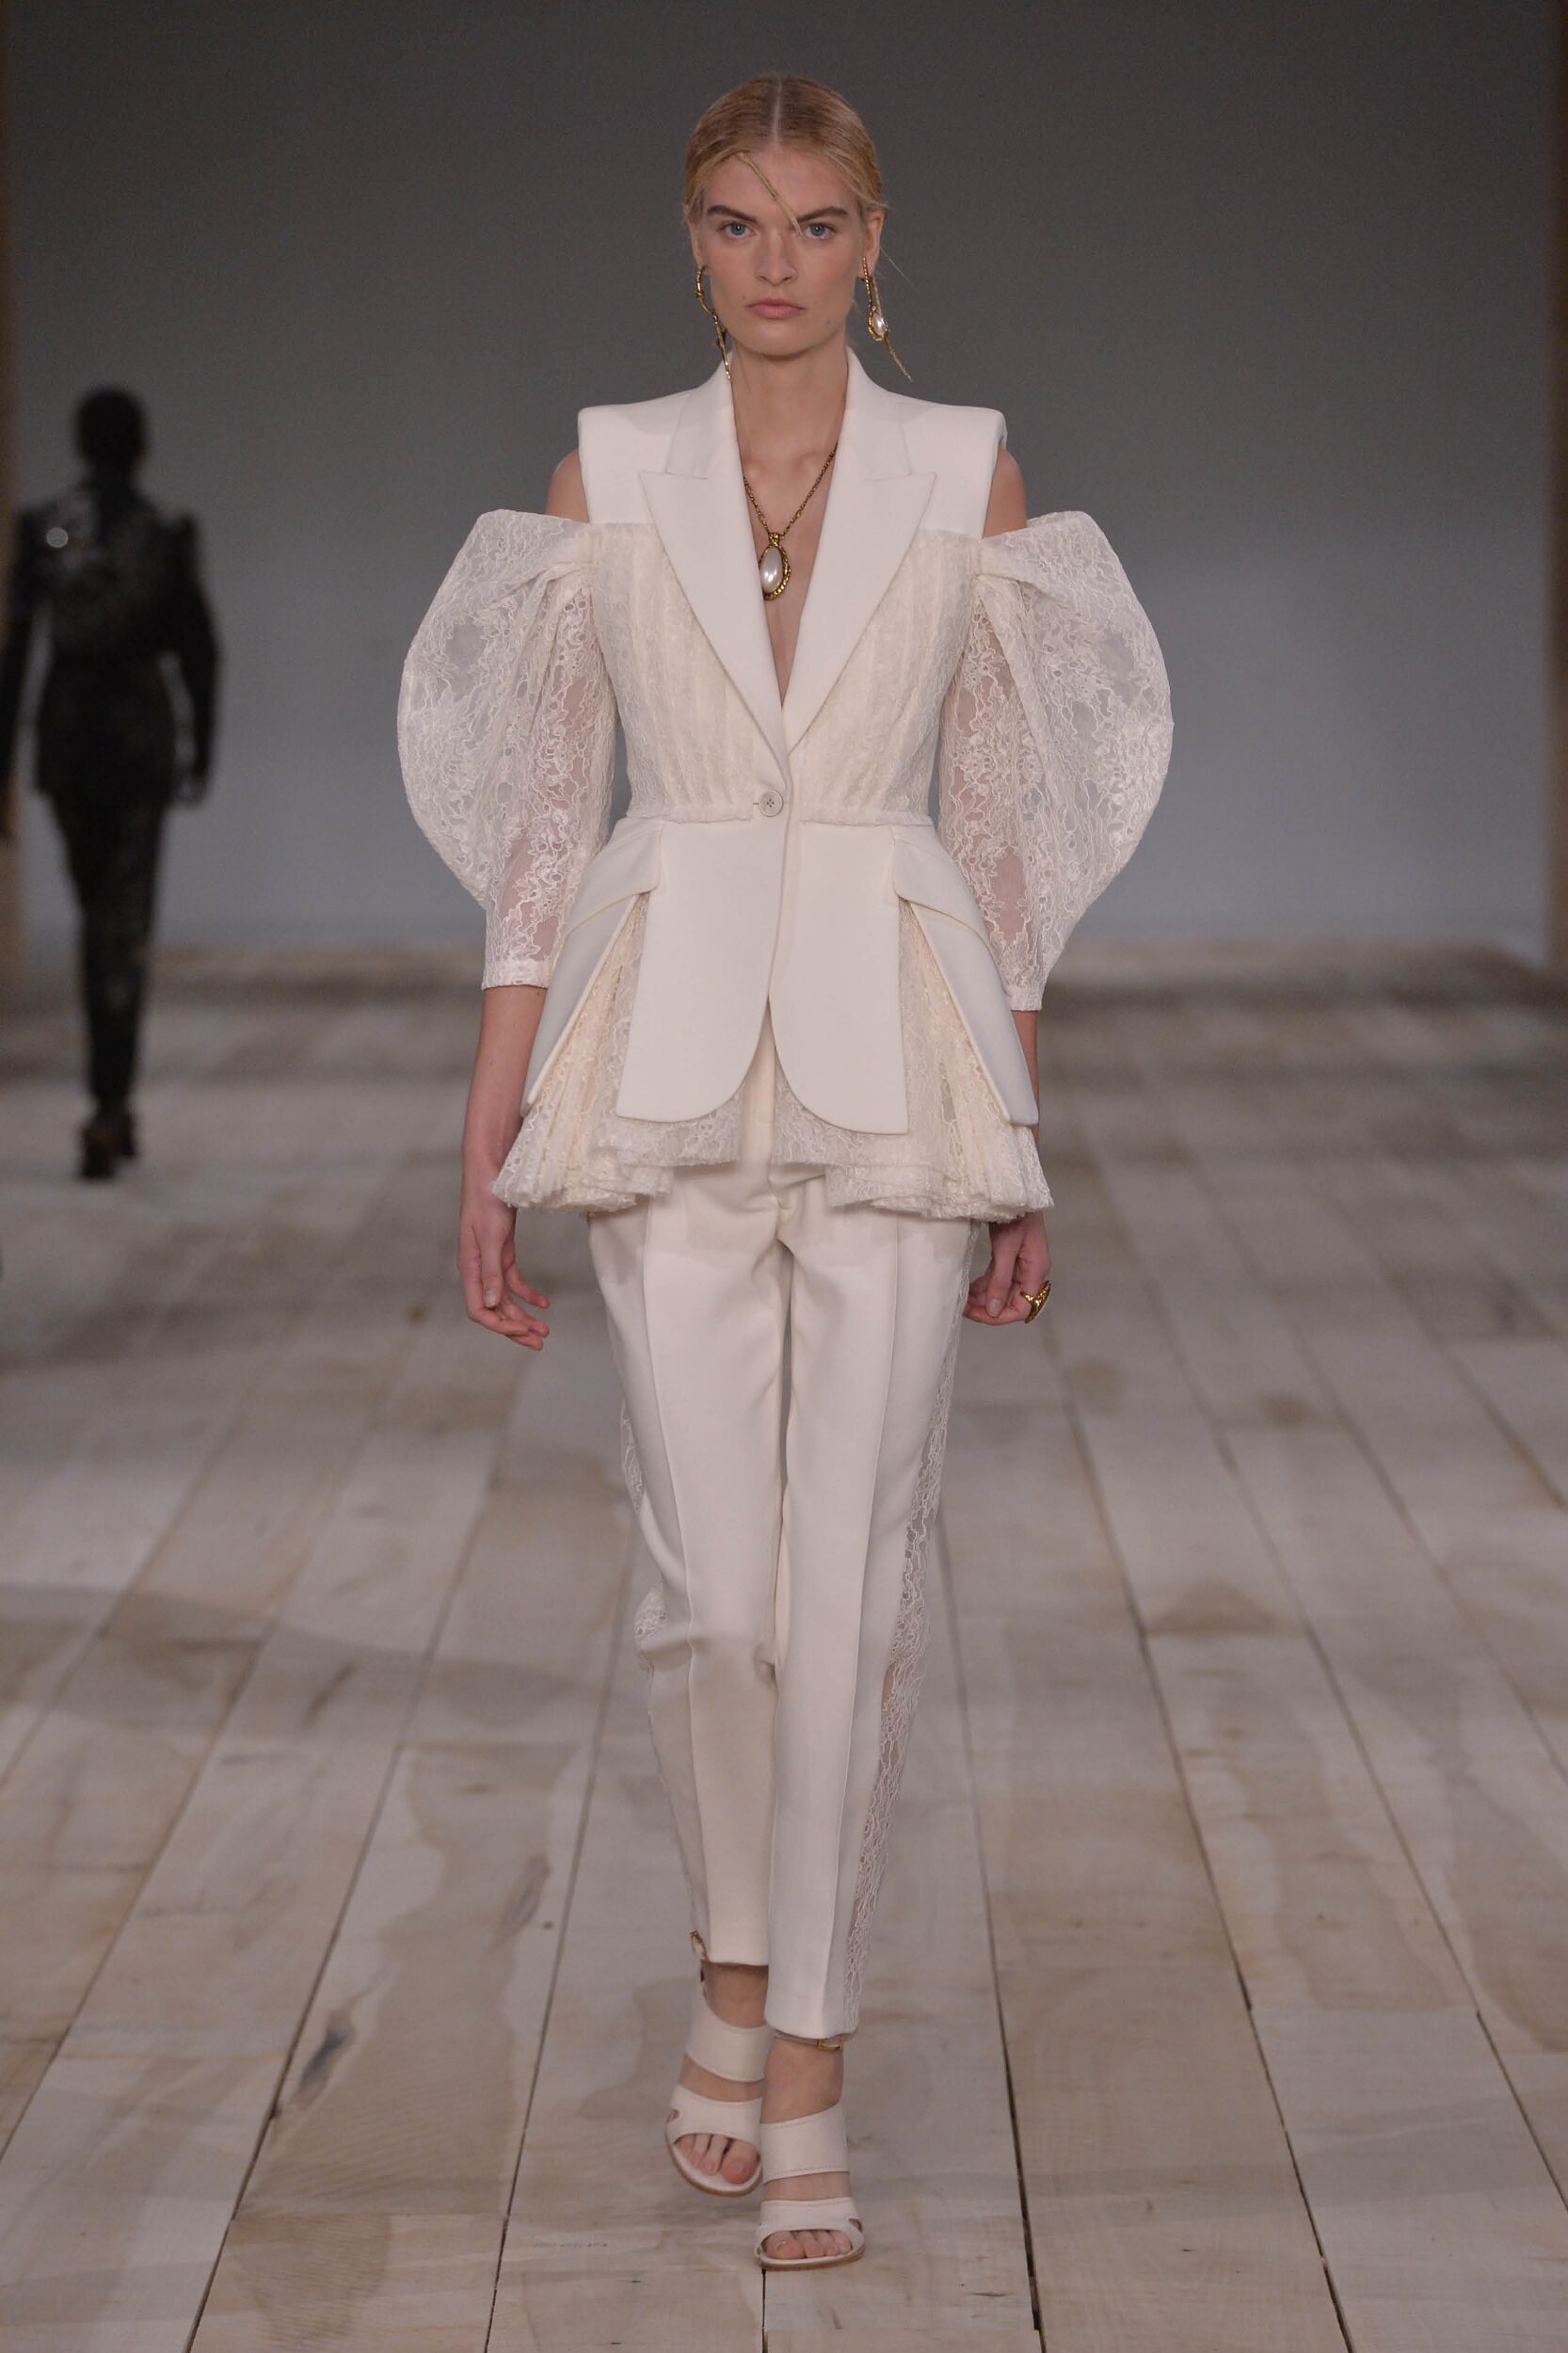 Alexander McQueen Spring 2020 Collection Review - Alley Girl - The Fashion  Technology Blog based in New York